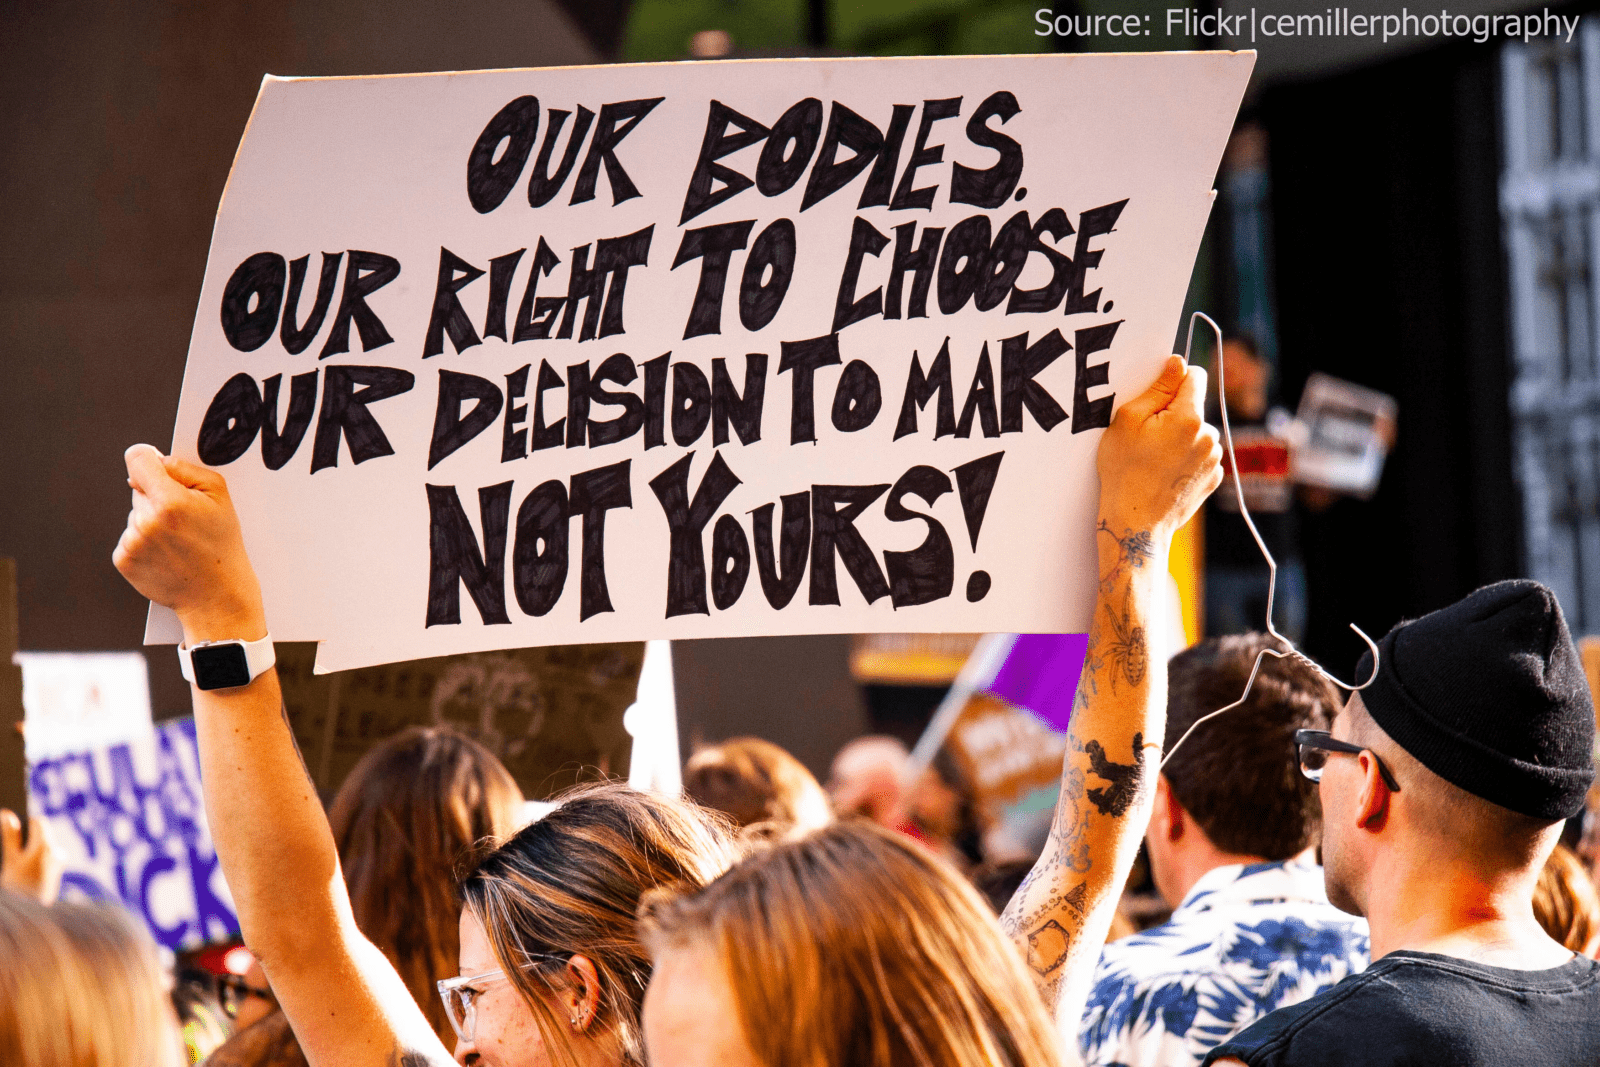 image from reproductive rights rally in Chicago in 2019 of a woman holding a sign that says "our bodies our right to choose our decision to make not yours!"